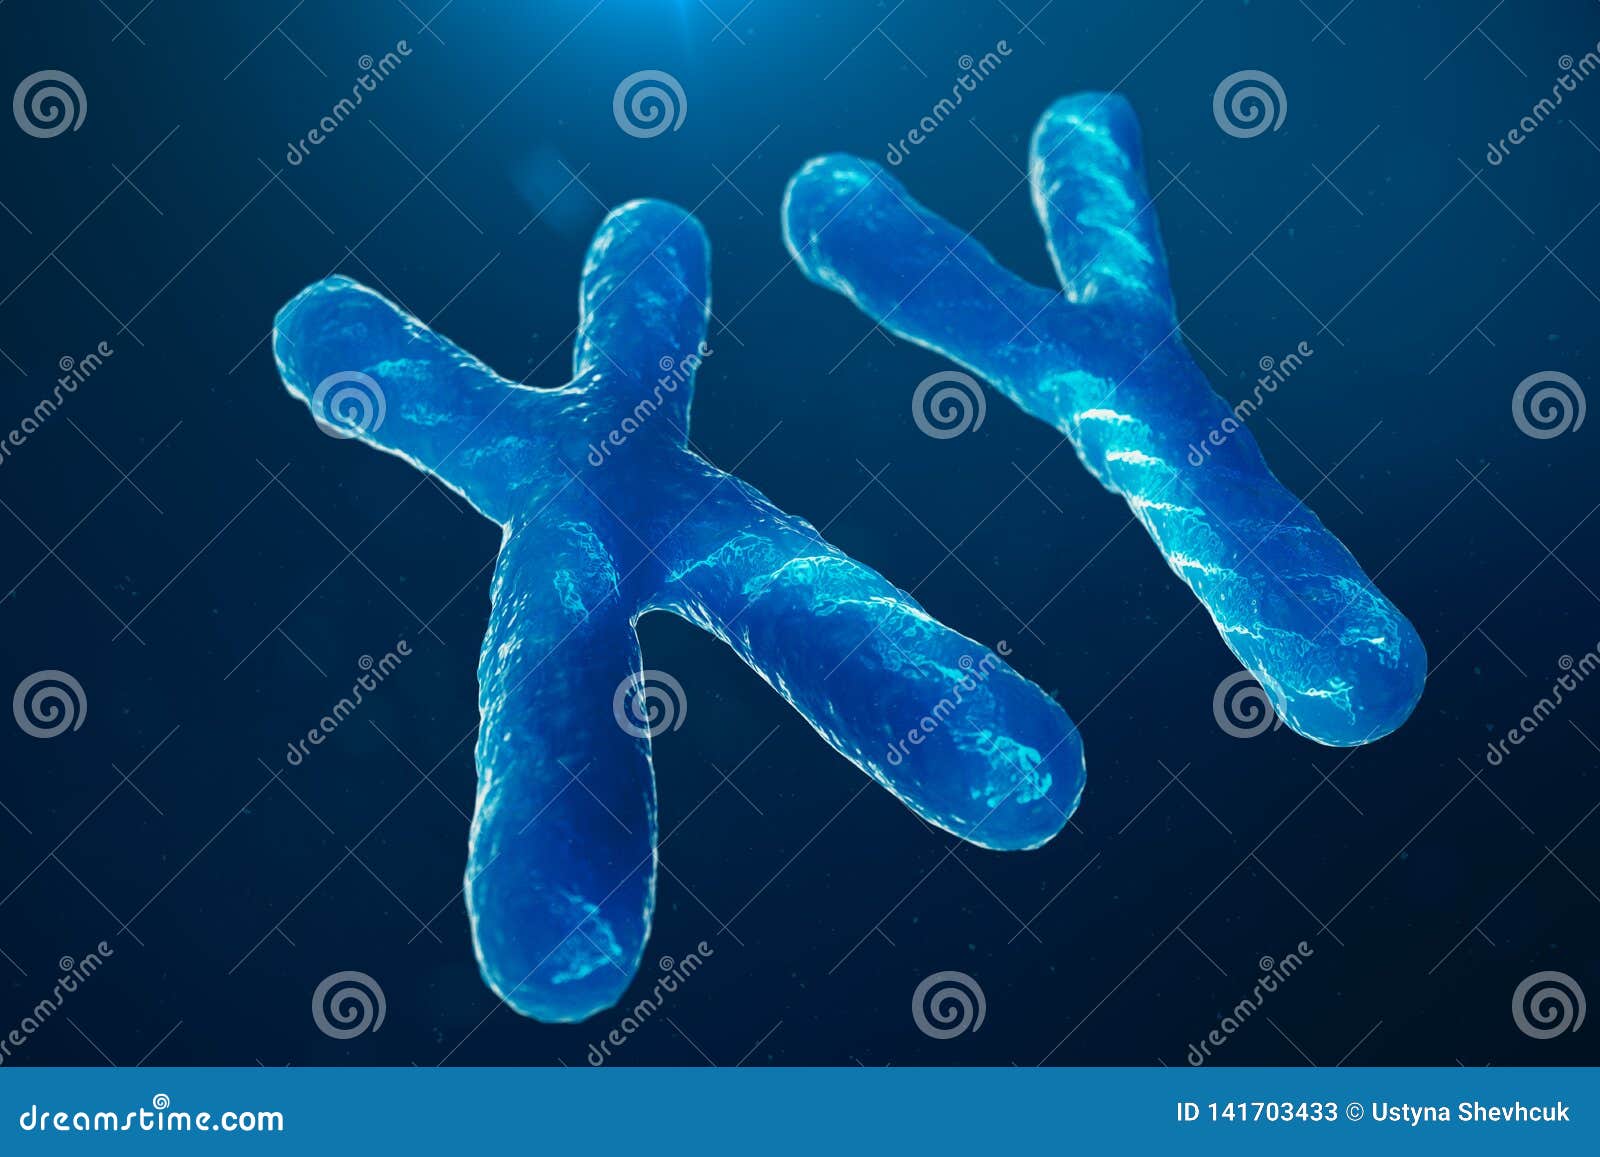 xy-chromosomes with dna carrying the genetic code. genetics concept, medicine concept. future, genetic mutations